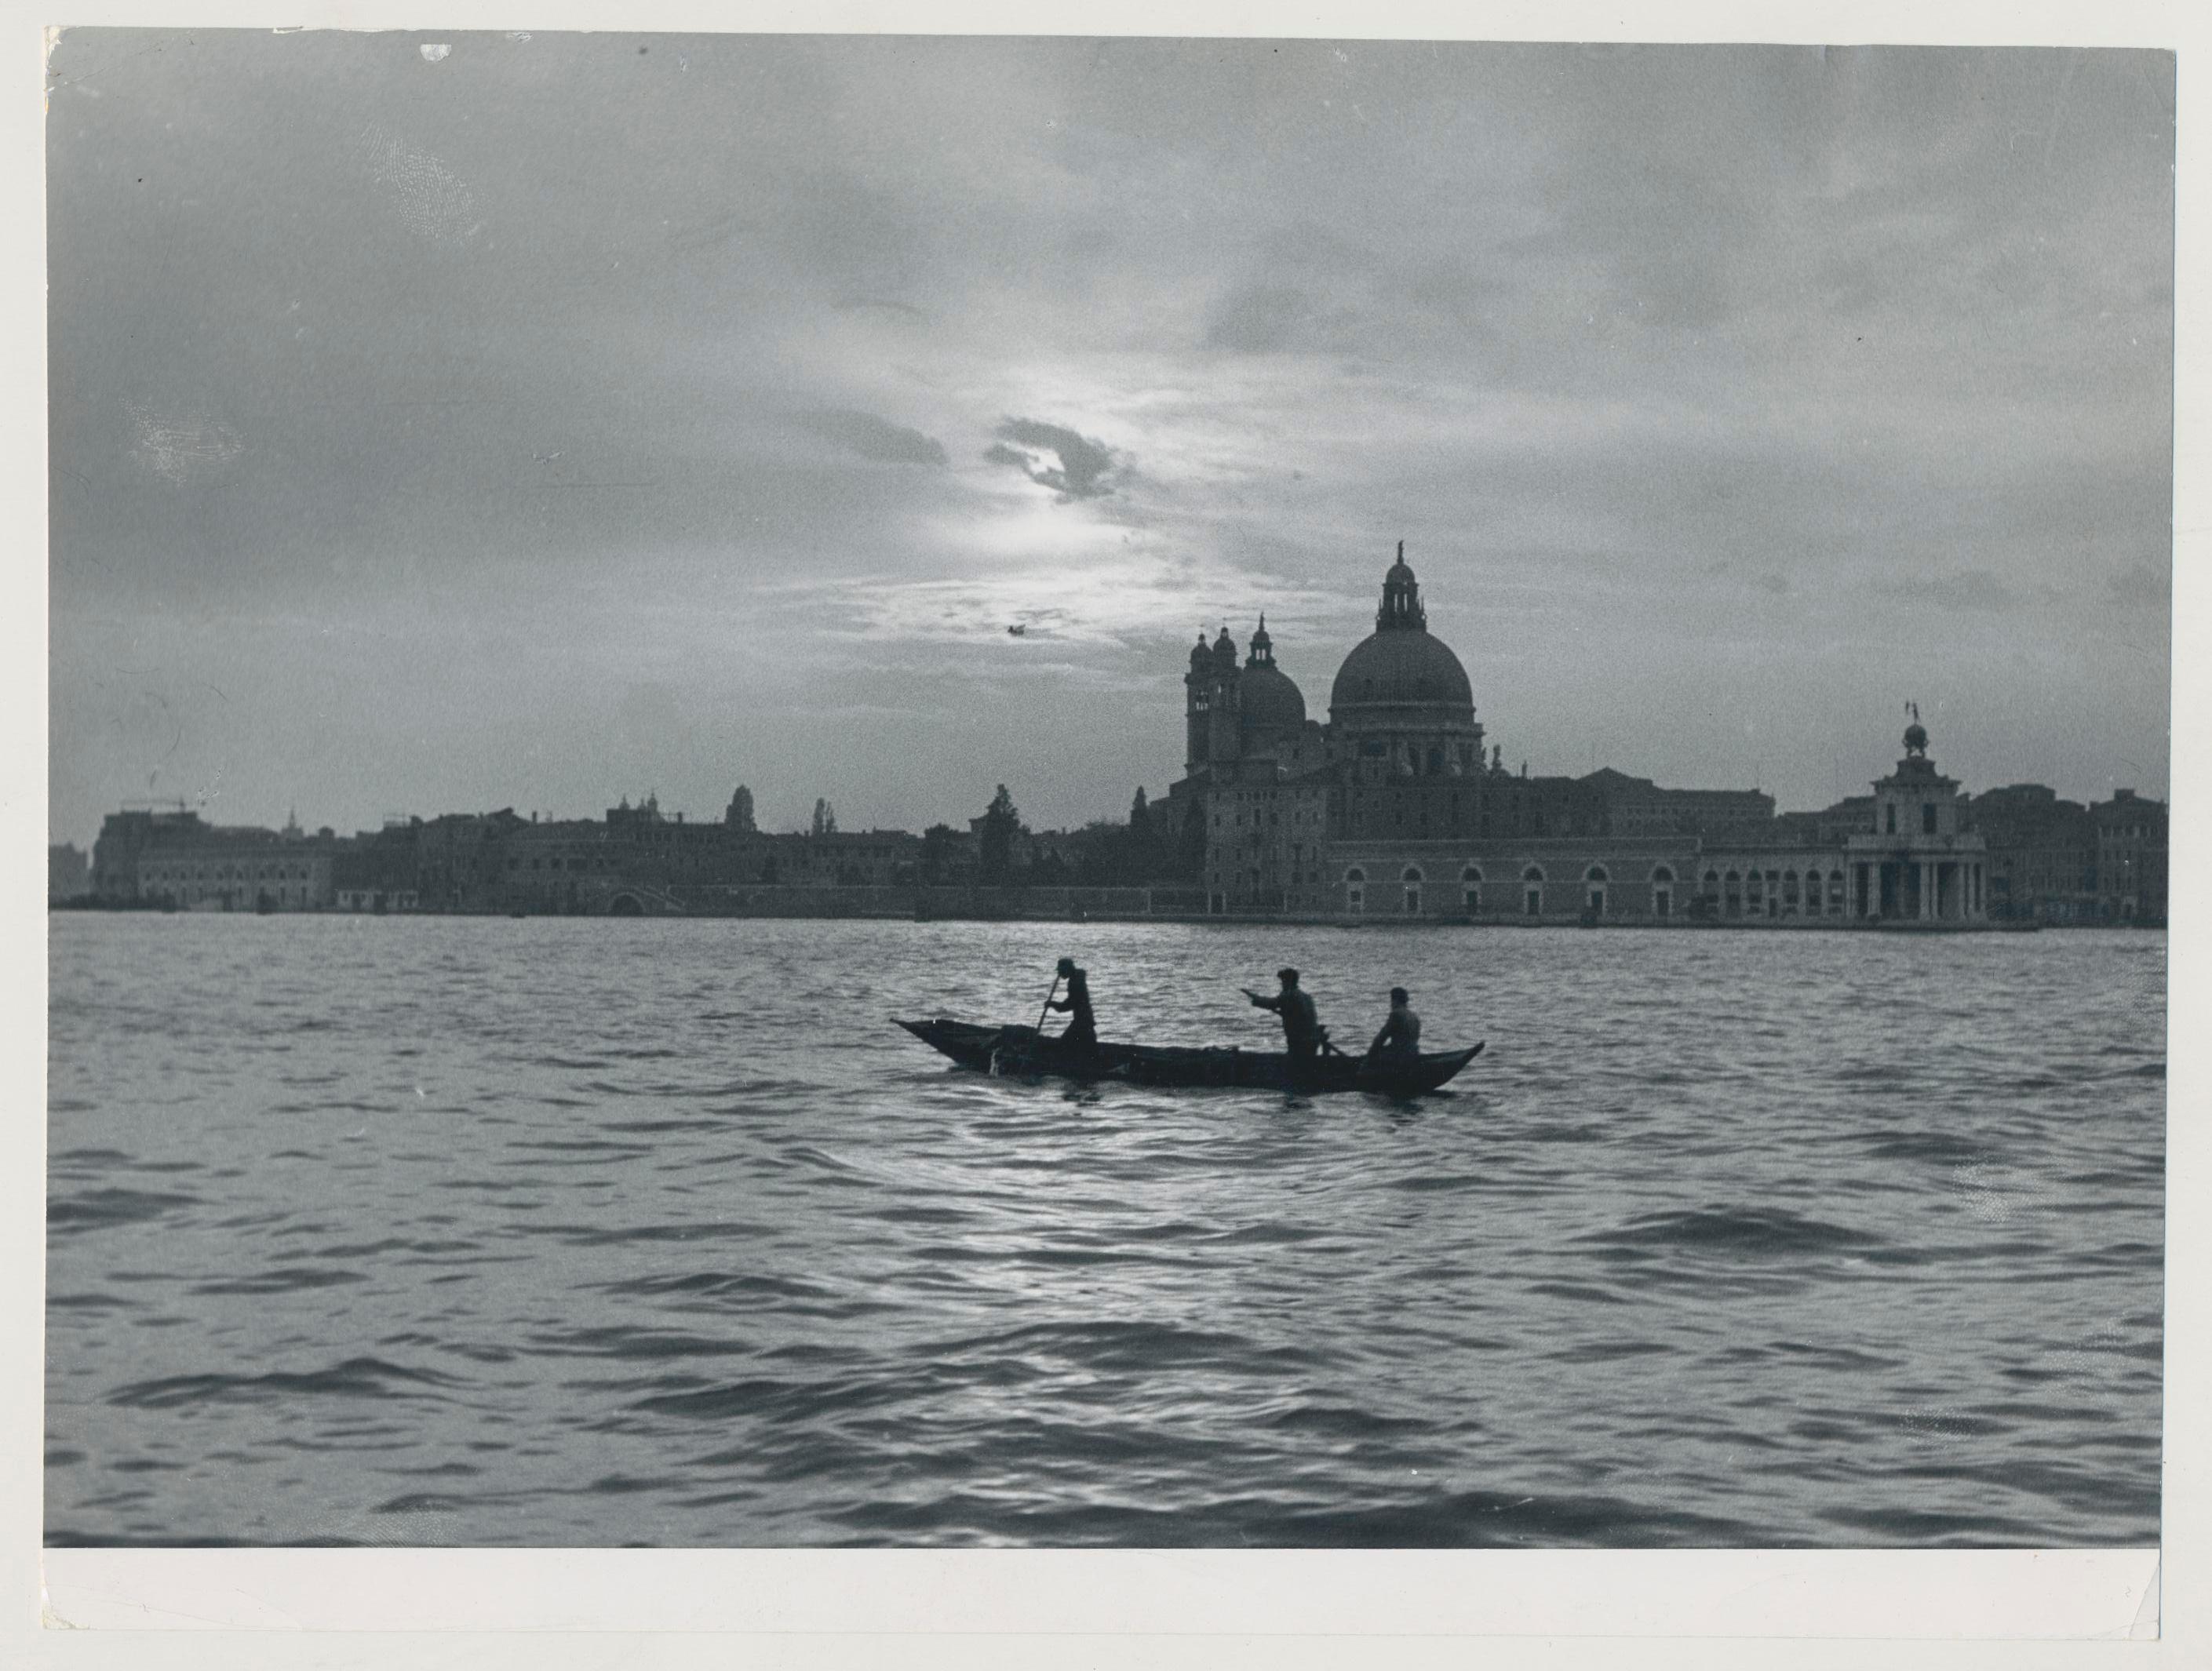 Erich Andres Landscape Photograph - Venice - Gondola on Water with Skyline, Italy, 1950s, 17, 2 x 22, 8 cm